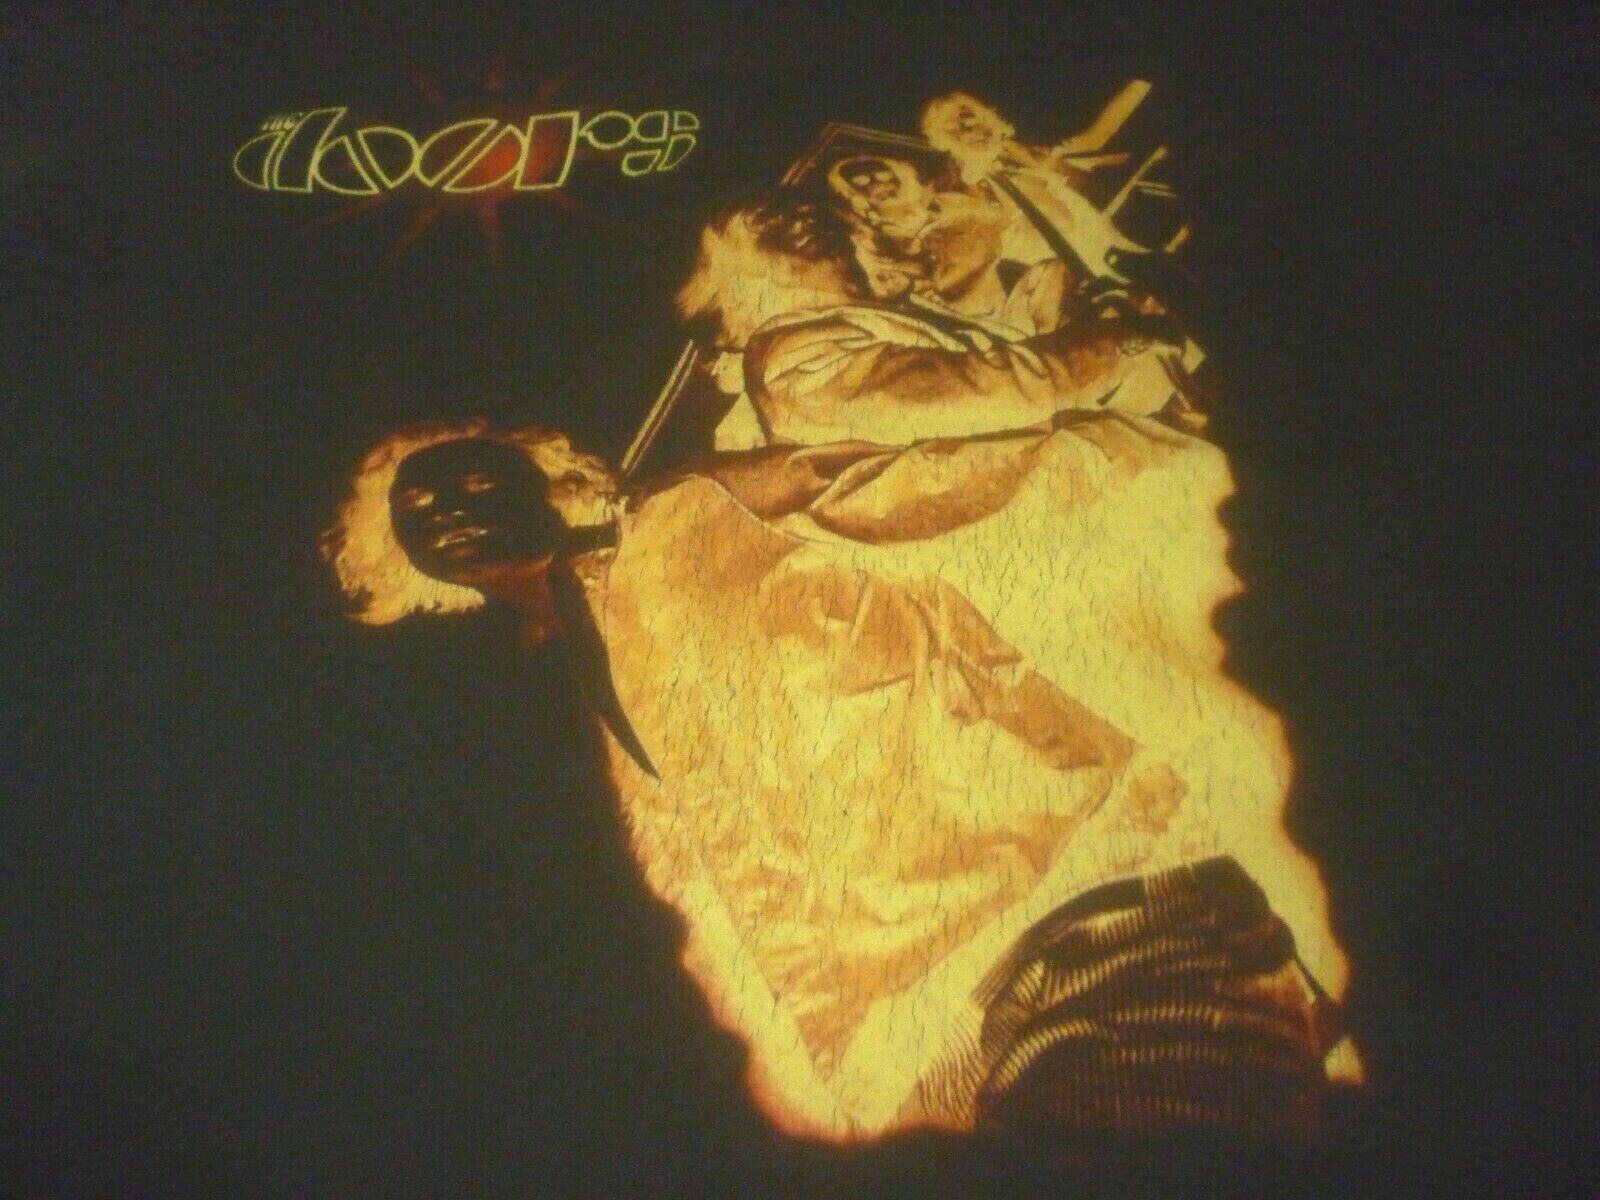 The Doors Vintage Shirt - Used Size Xl Missing Tag - Good Condition!!!